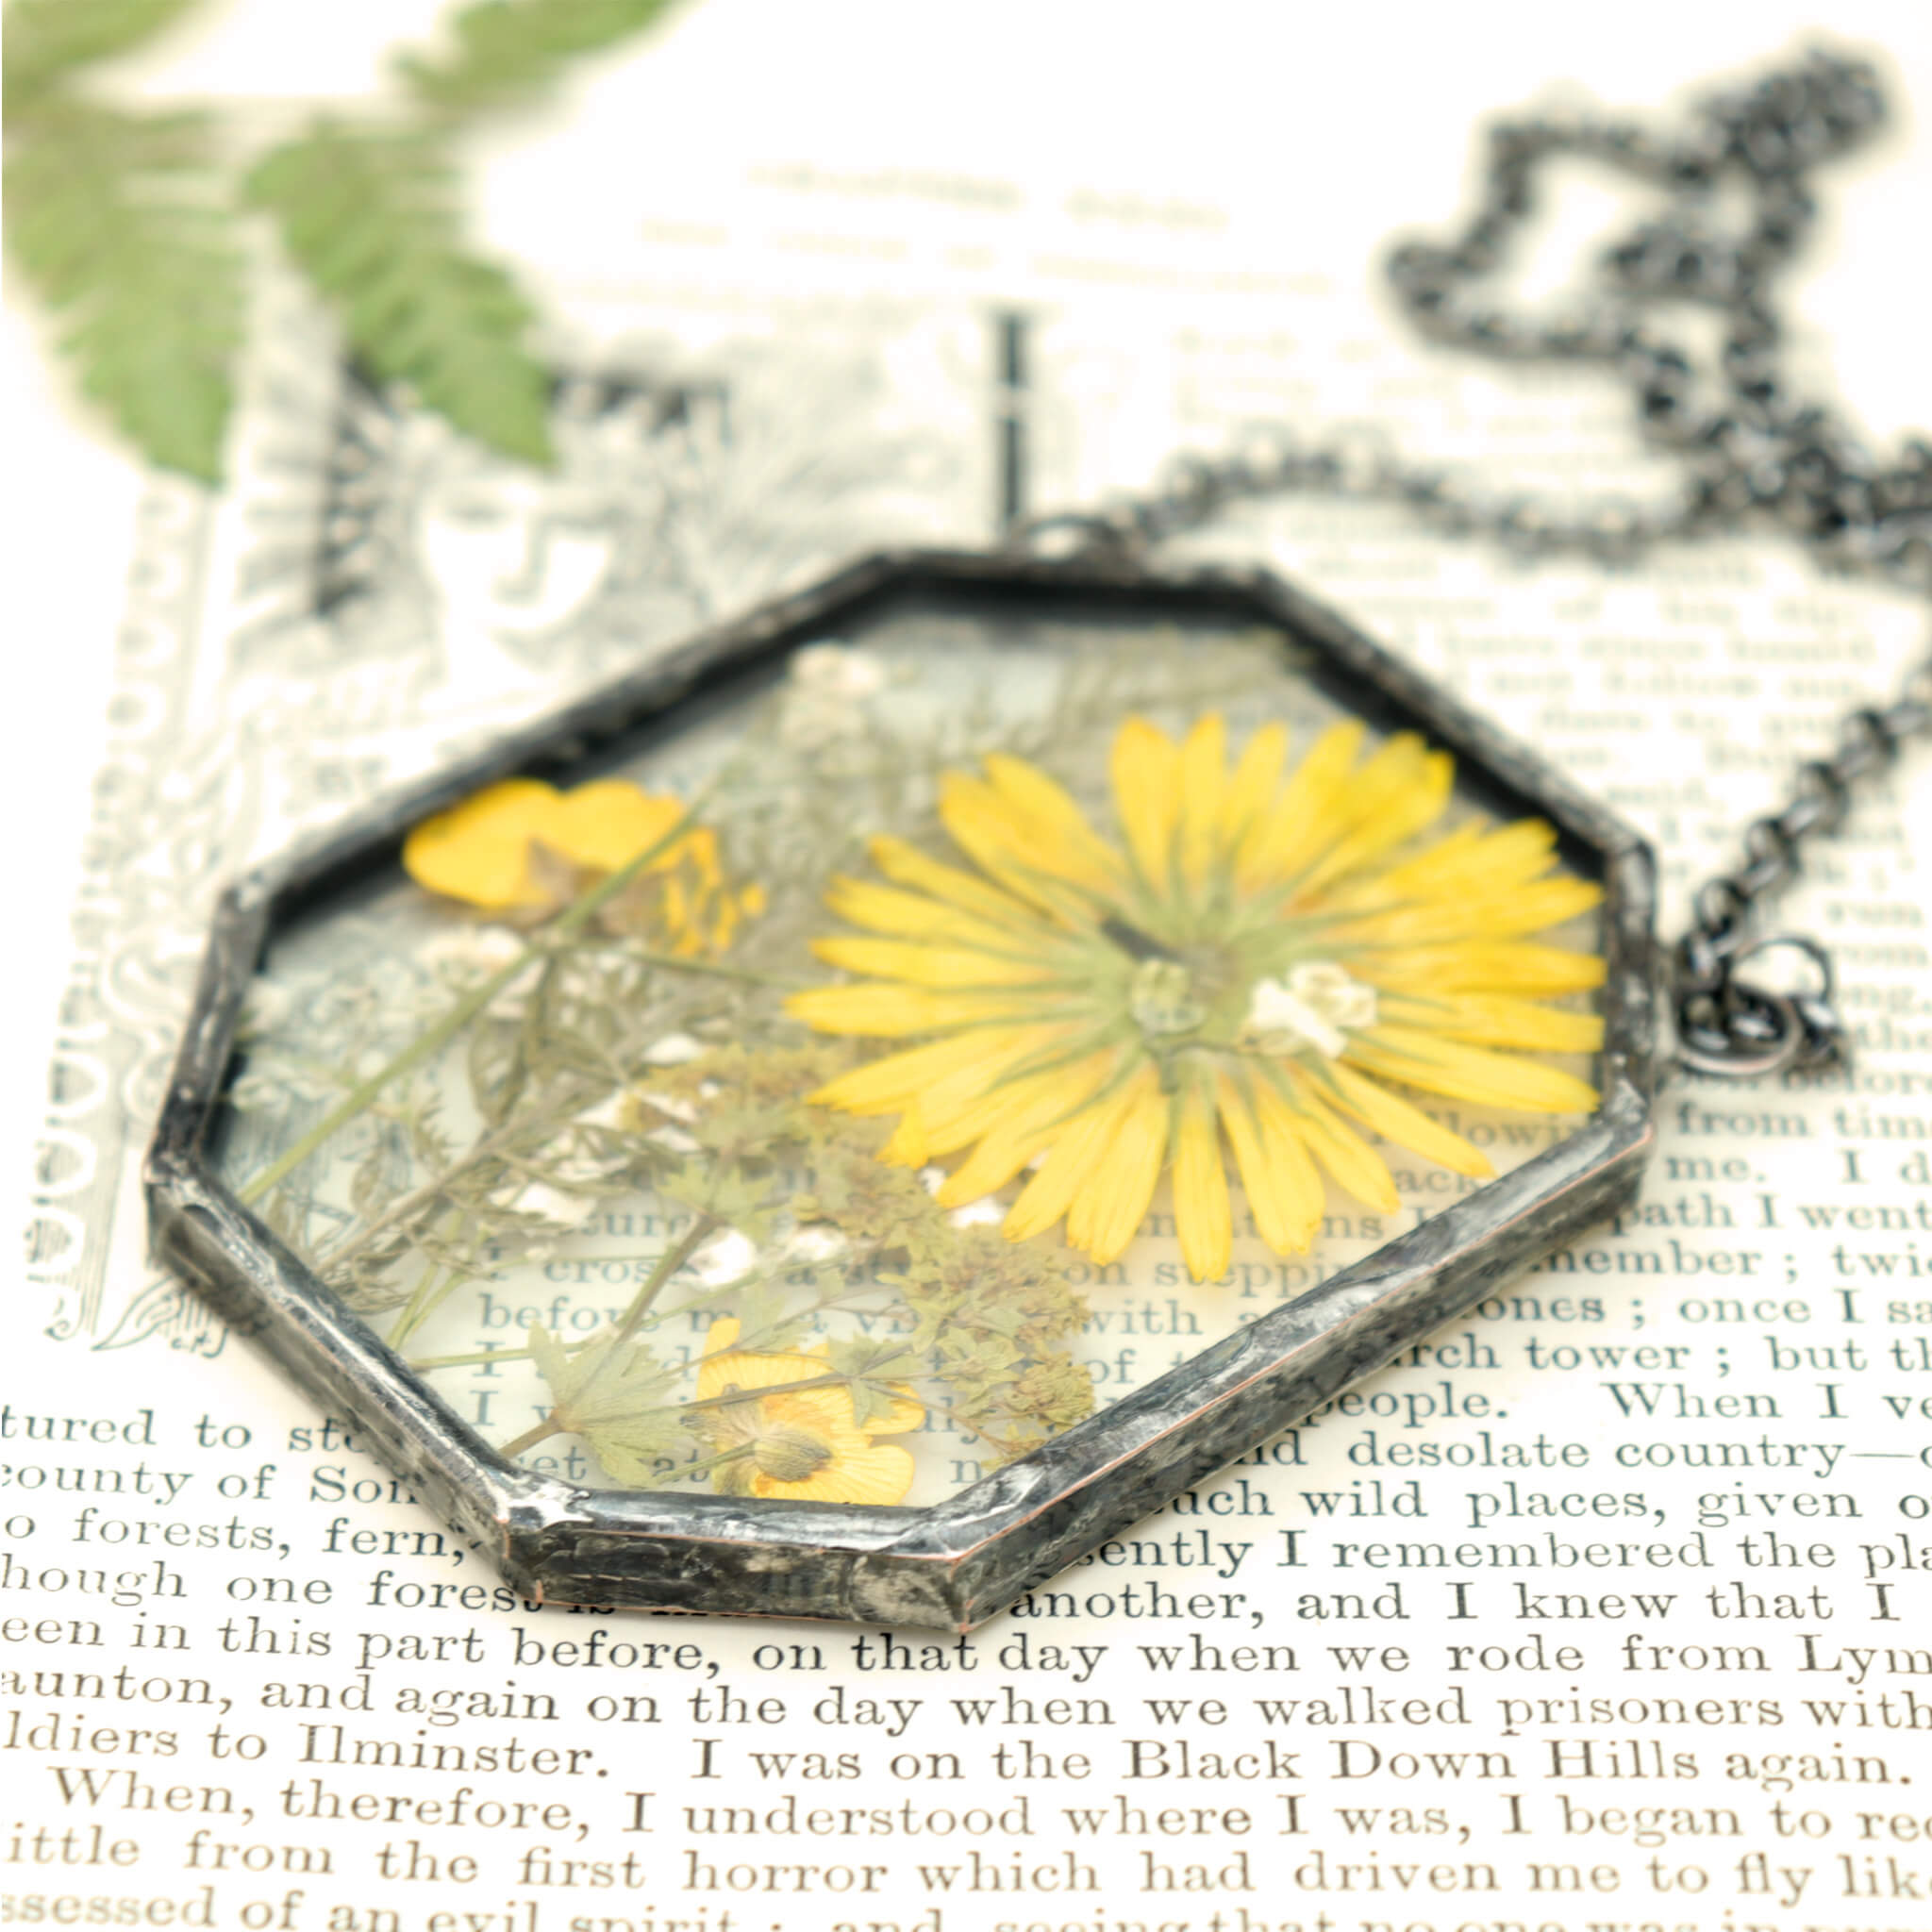 yellow flowers and greenery in glass and solder necklace lying on an old book